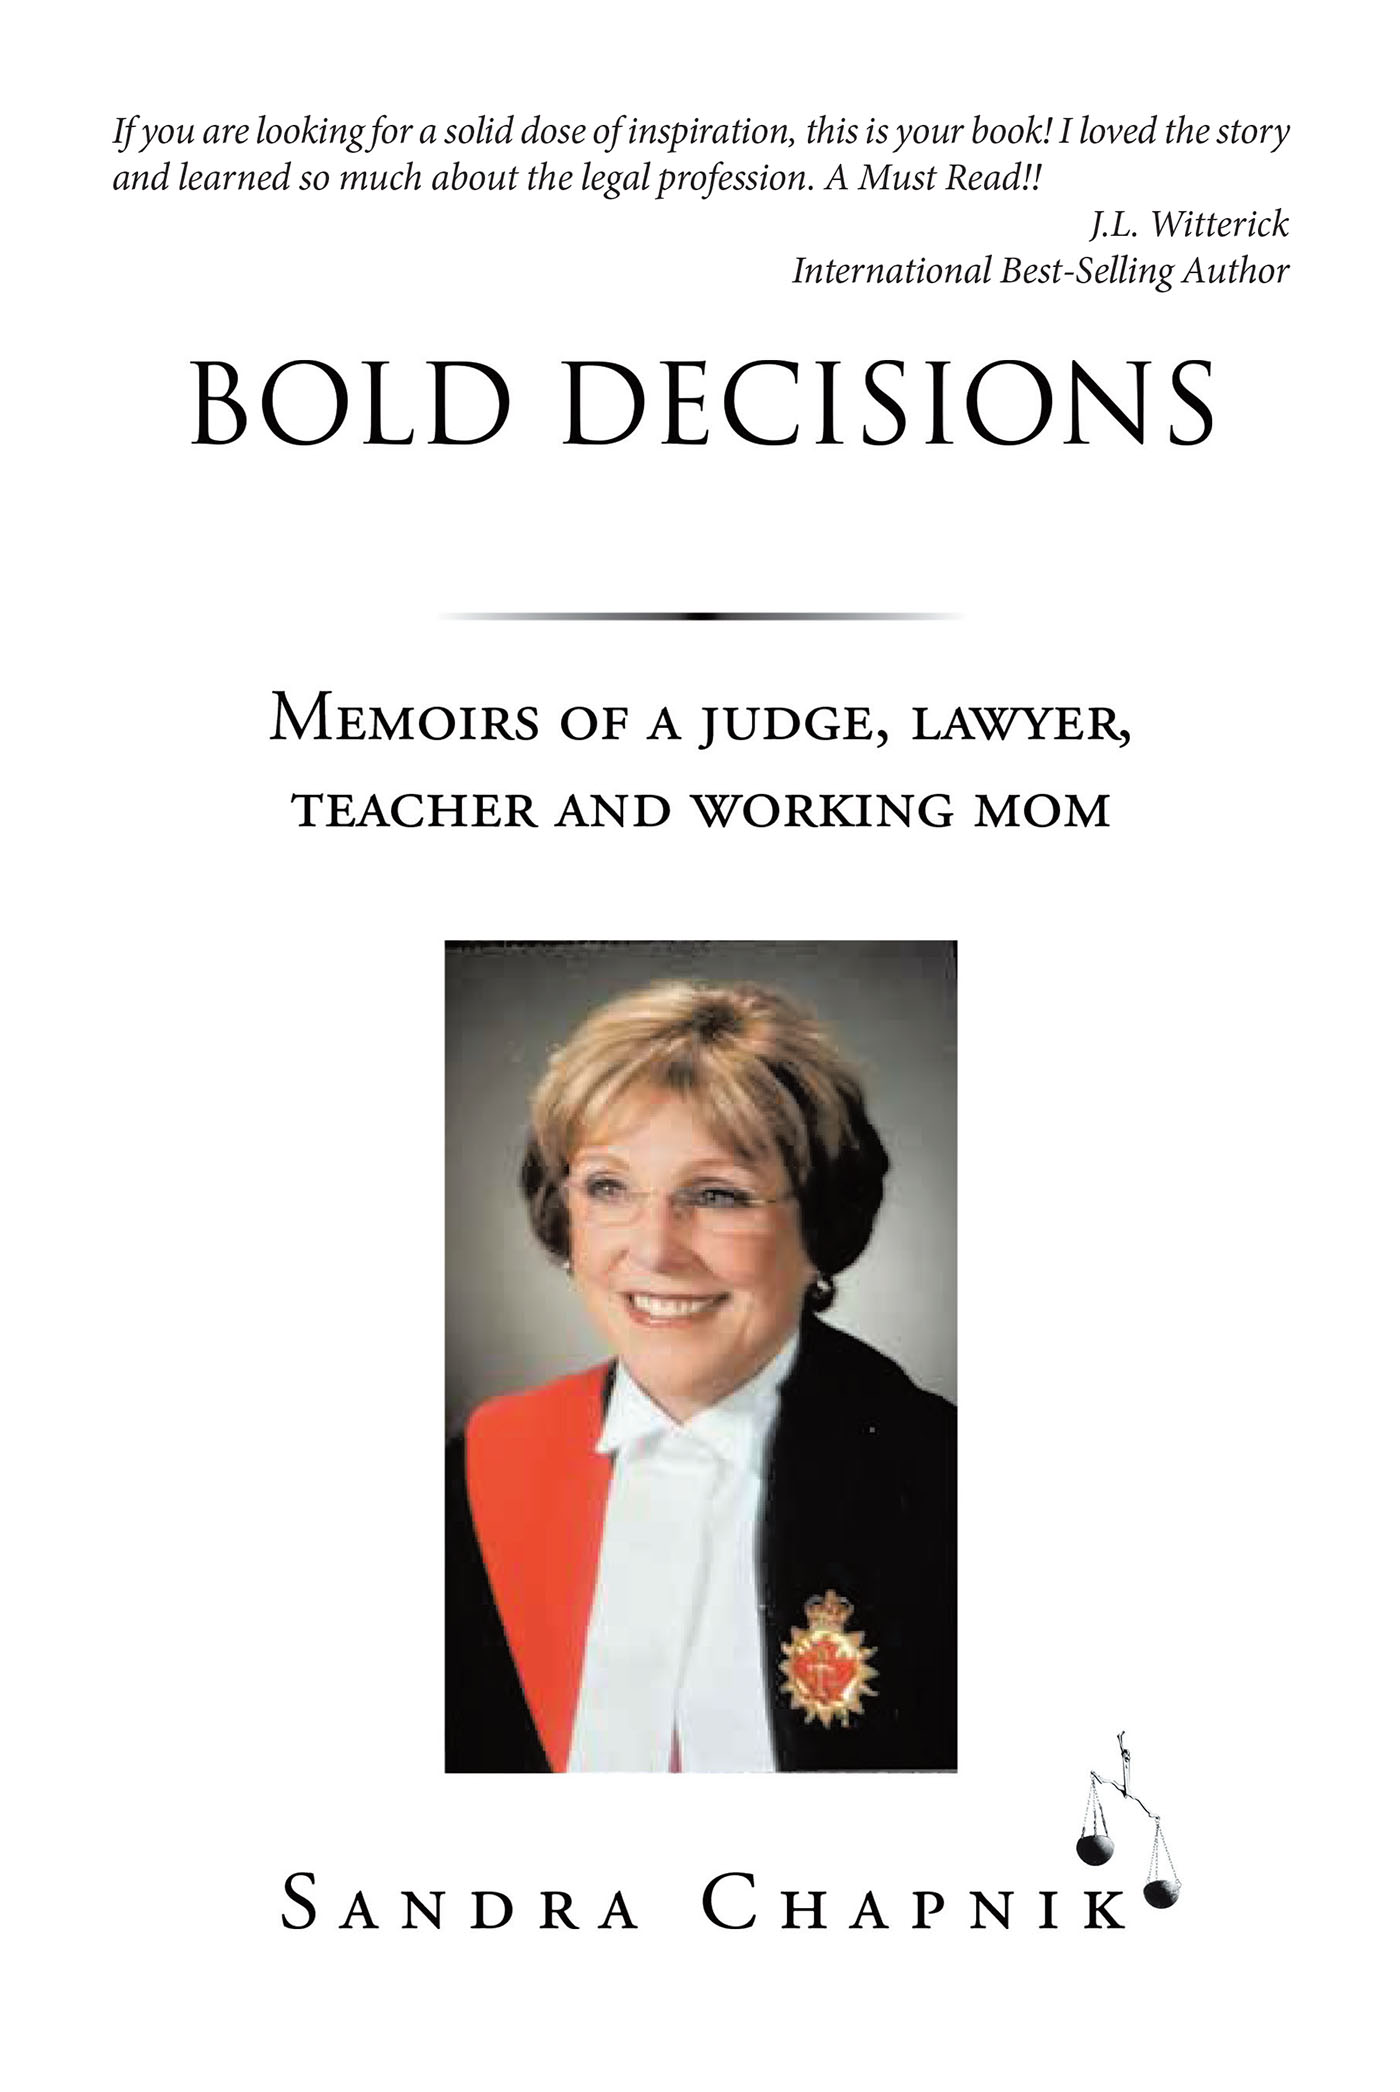 Sandra Chapnik’s New Book, “Bold Decisions: Memoirs of a Judge, Lawyer, Teacher, and Working Mom,” Reveals How the Author Managed to Juggle Her Career and Mother Duties